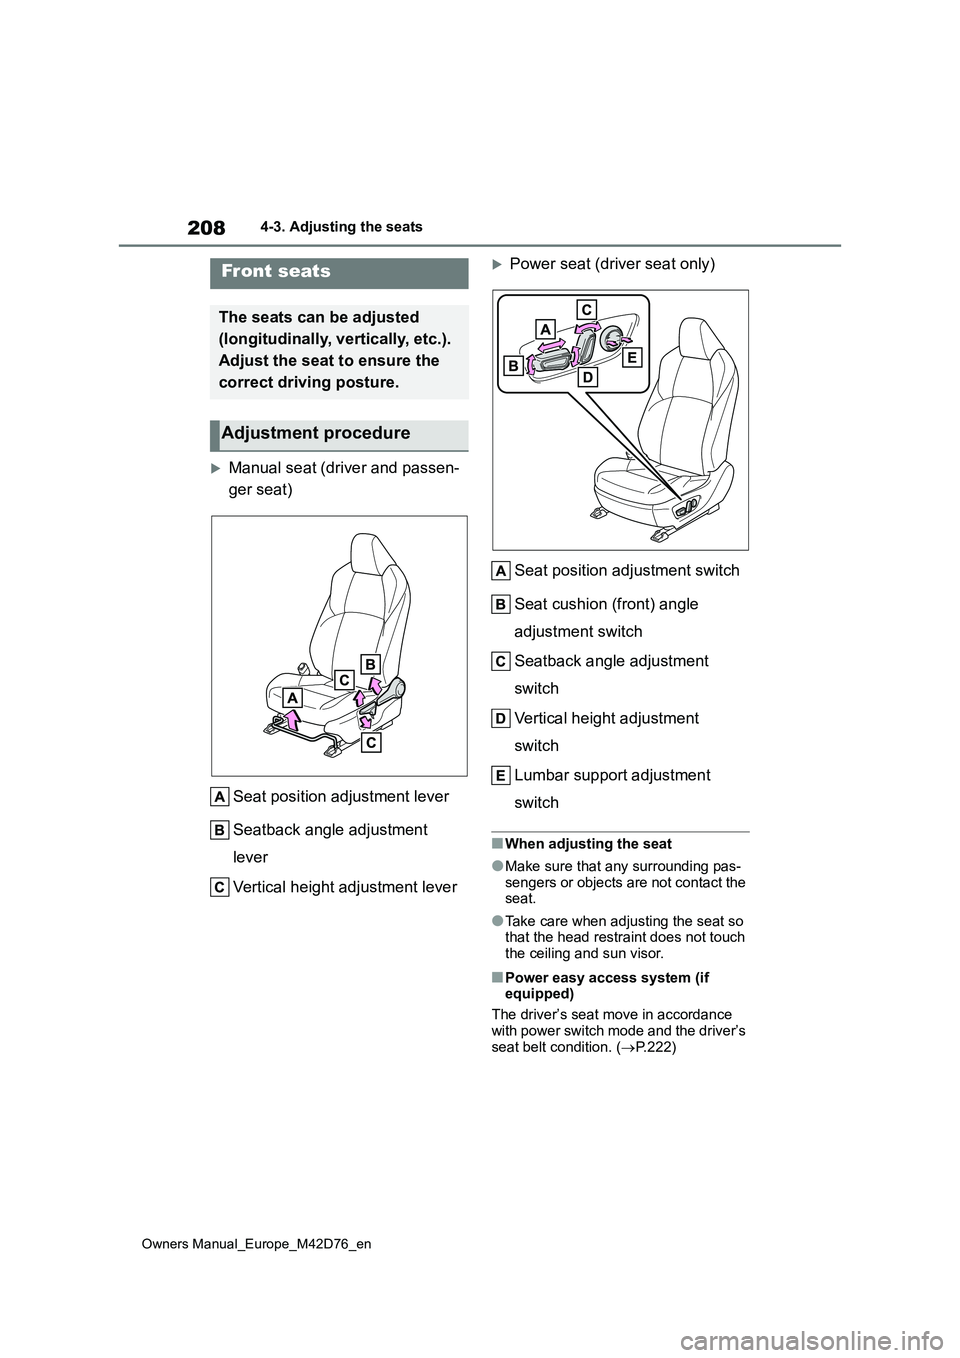 TOYOTA BZ4X 2022  Owners Manual (in English) 208
Owners Manual_Europe_M42D76_en
4-3. Adjusting the seats
4-3.Adjusting  the sea ts
Manual seat (driver and passen- 
ger seat) 
Seat position adjustment lever 
Seatback angle adjustment  
lever 
